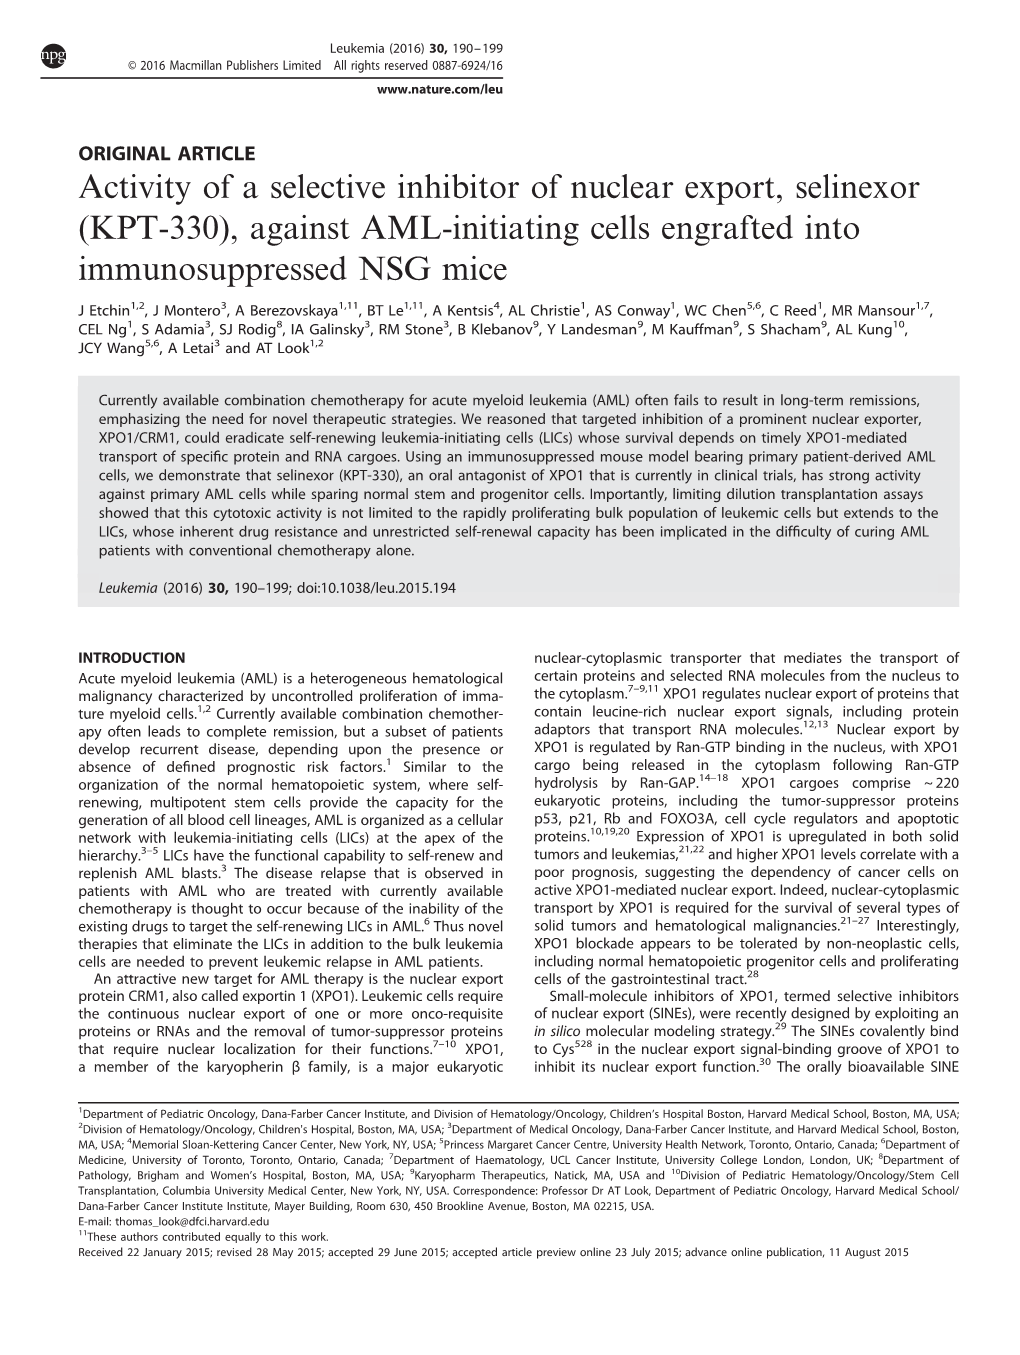 KPT-330), Against AML-Initiating Cells Engrafted Into Immunosuppressed NSG Mice